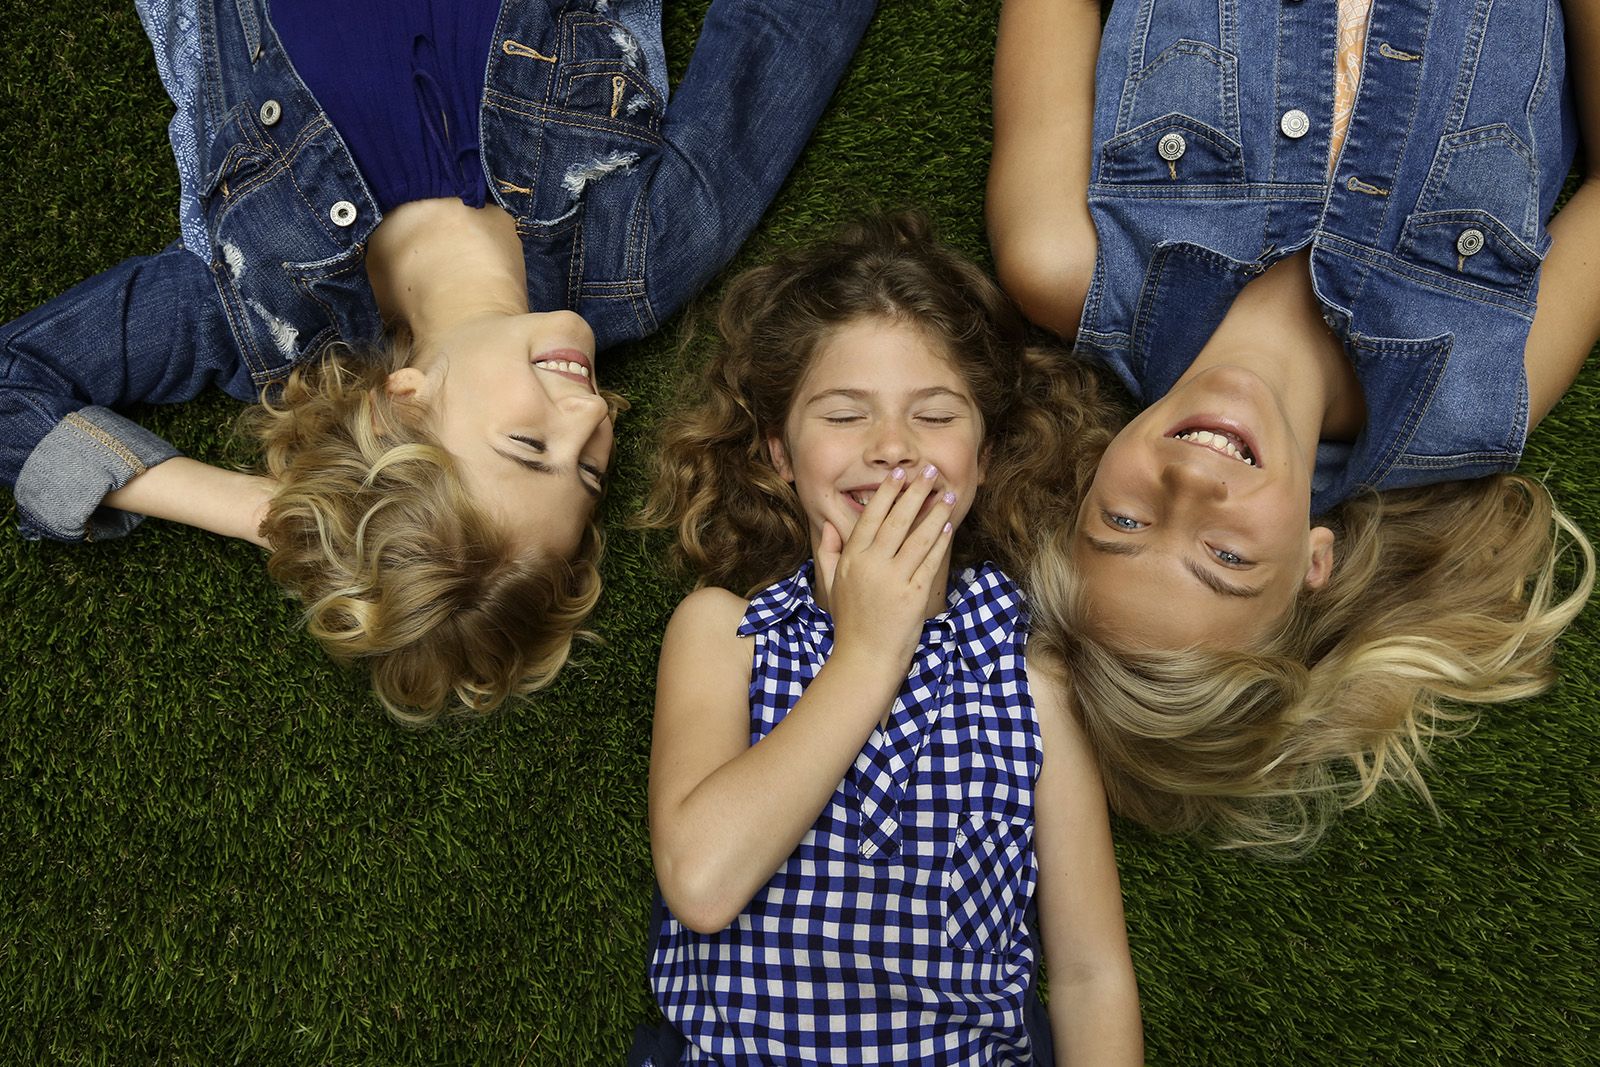 Ladies laughing on the grass